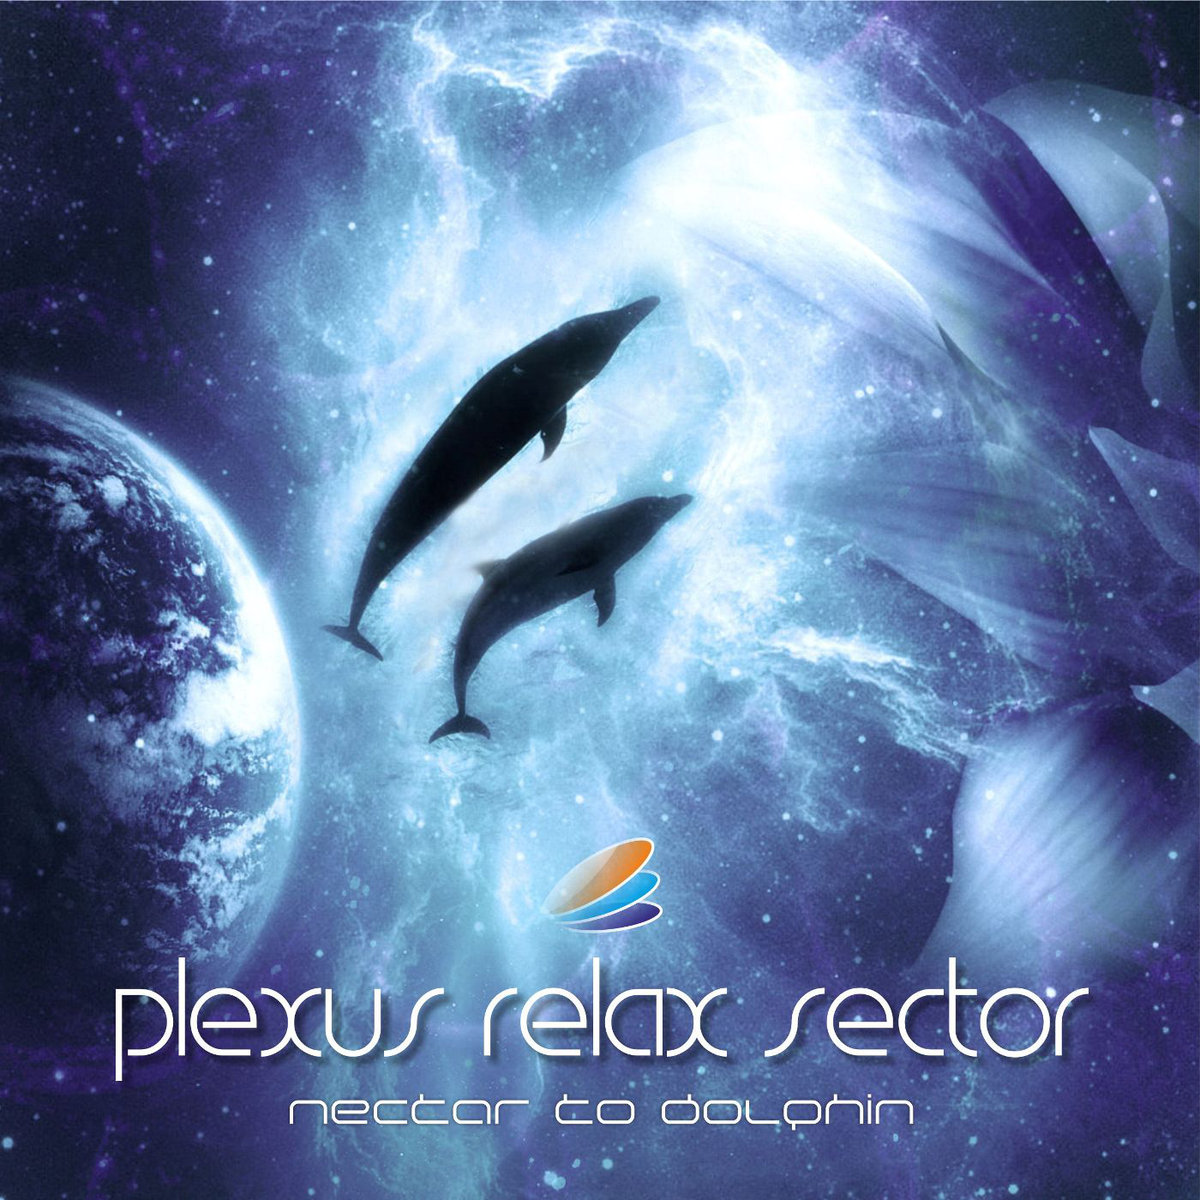 Plexus Relax Sector - Nectar To Dolphin